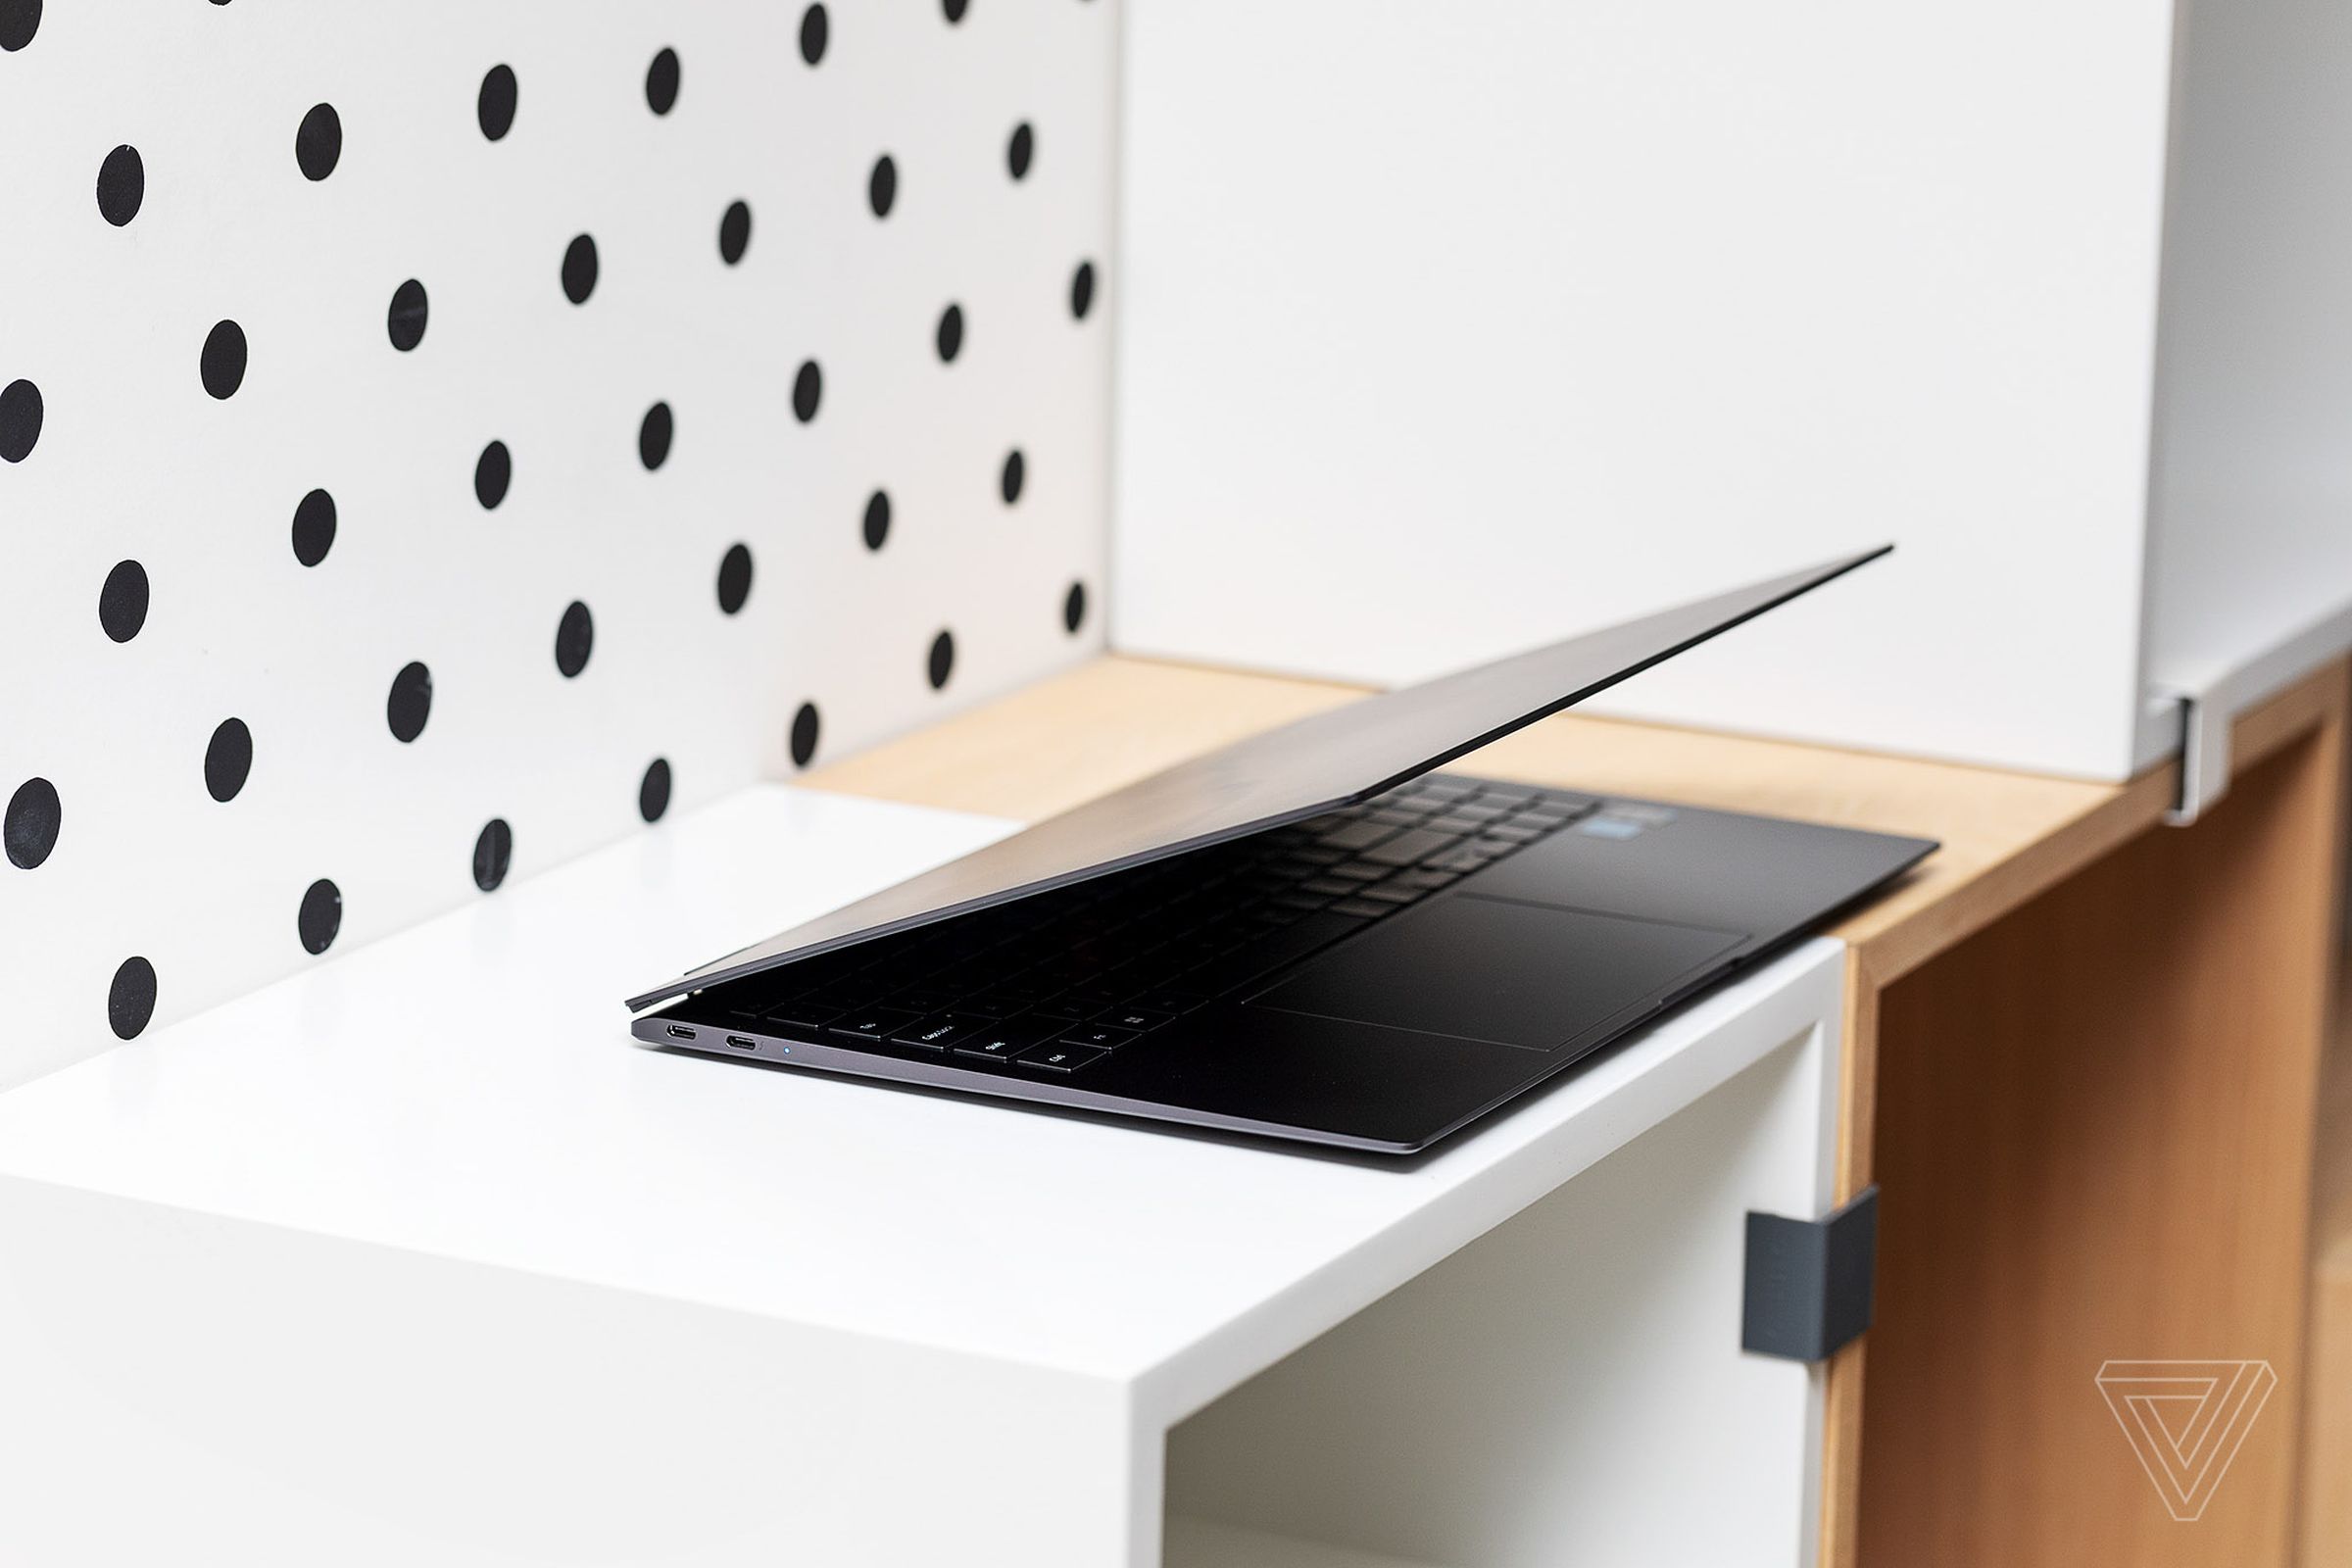 The Samsung Galaxy Book2 Pro 360 half open in front of a polka dot wallpaper.